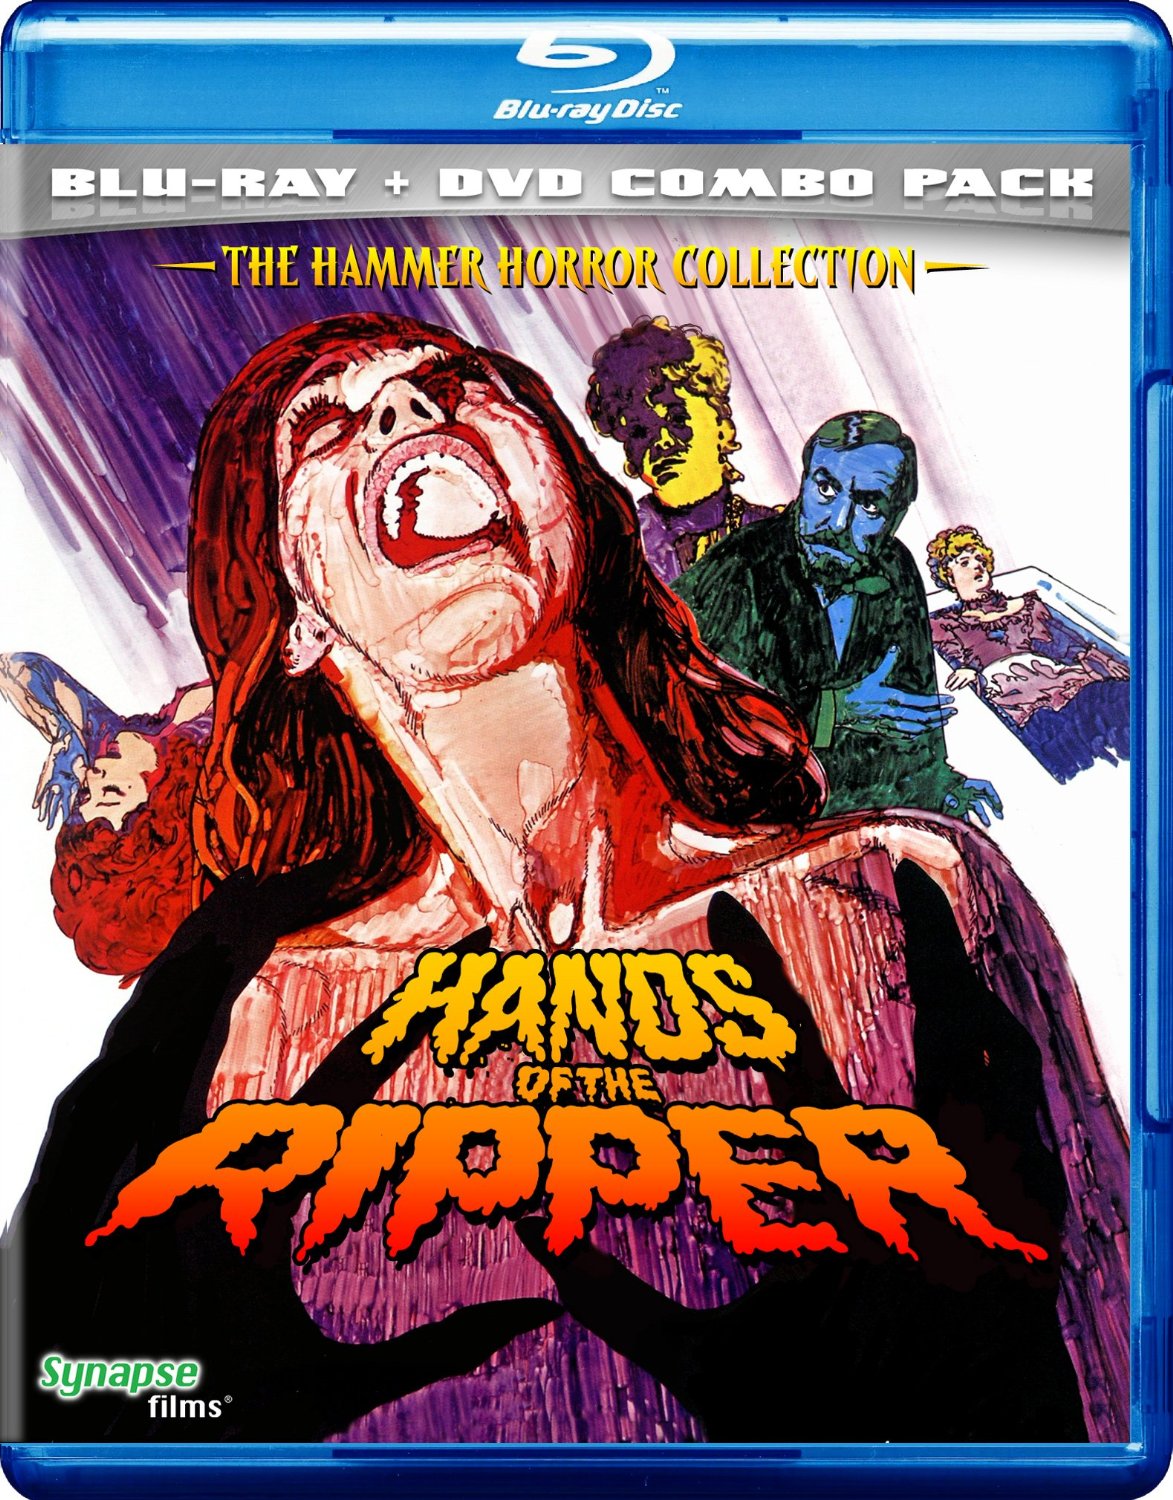 Hands of the Ripper (1971) starring Angharad Rees, Eric Porter